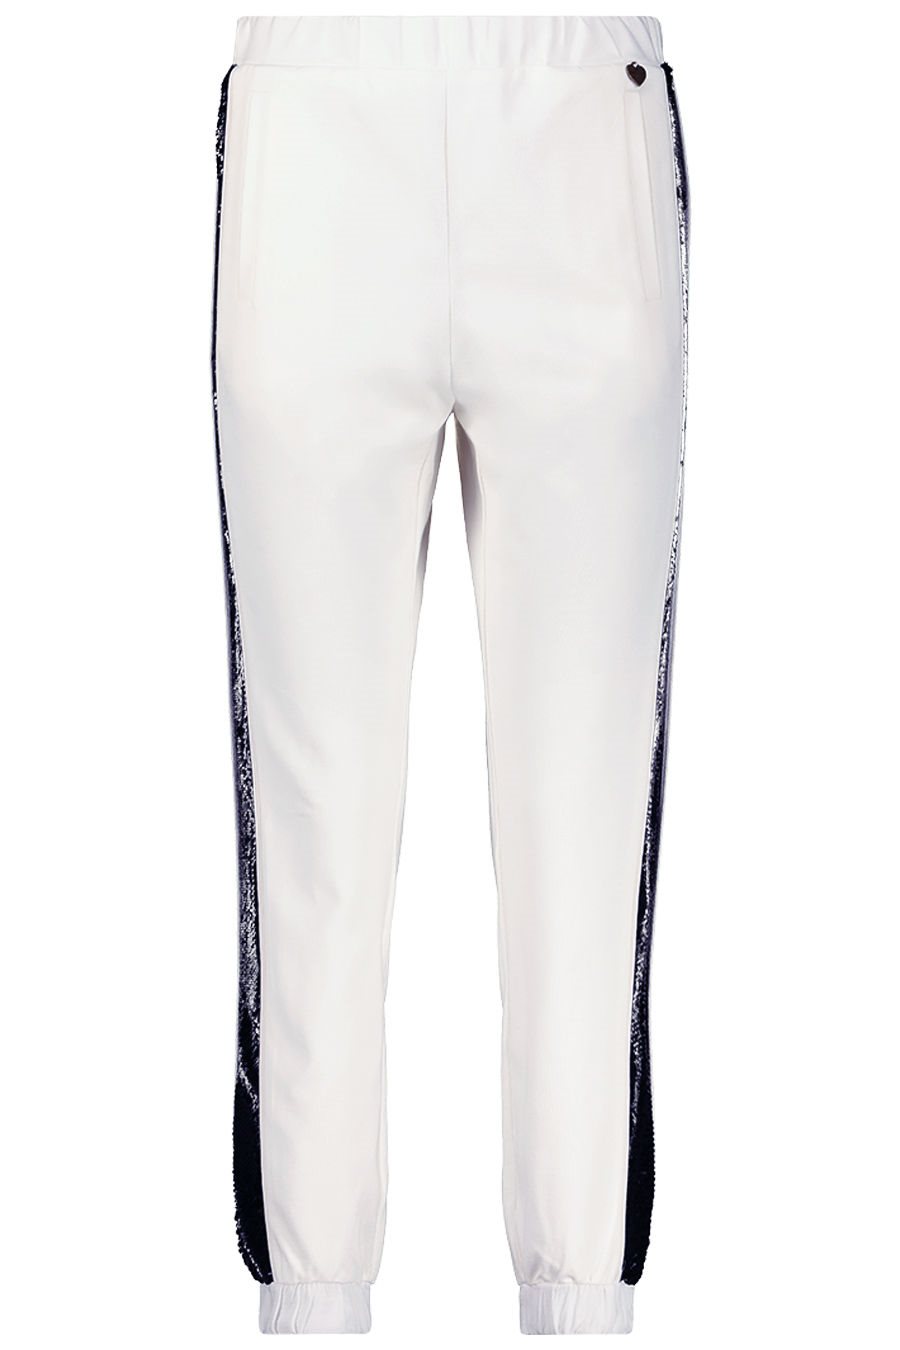 firusas.com_Twinset_Sequin track trousers_EUR 143